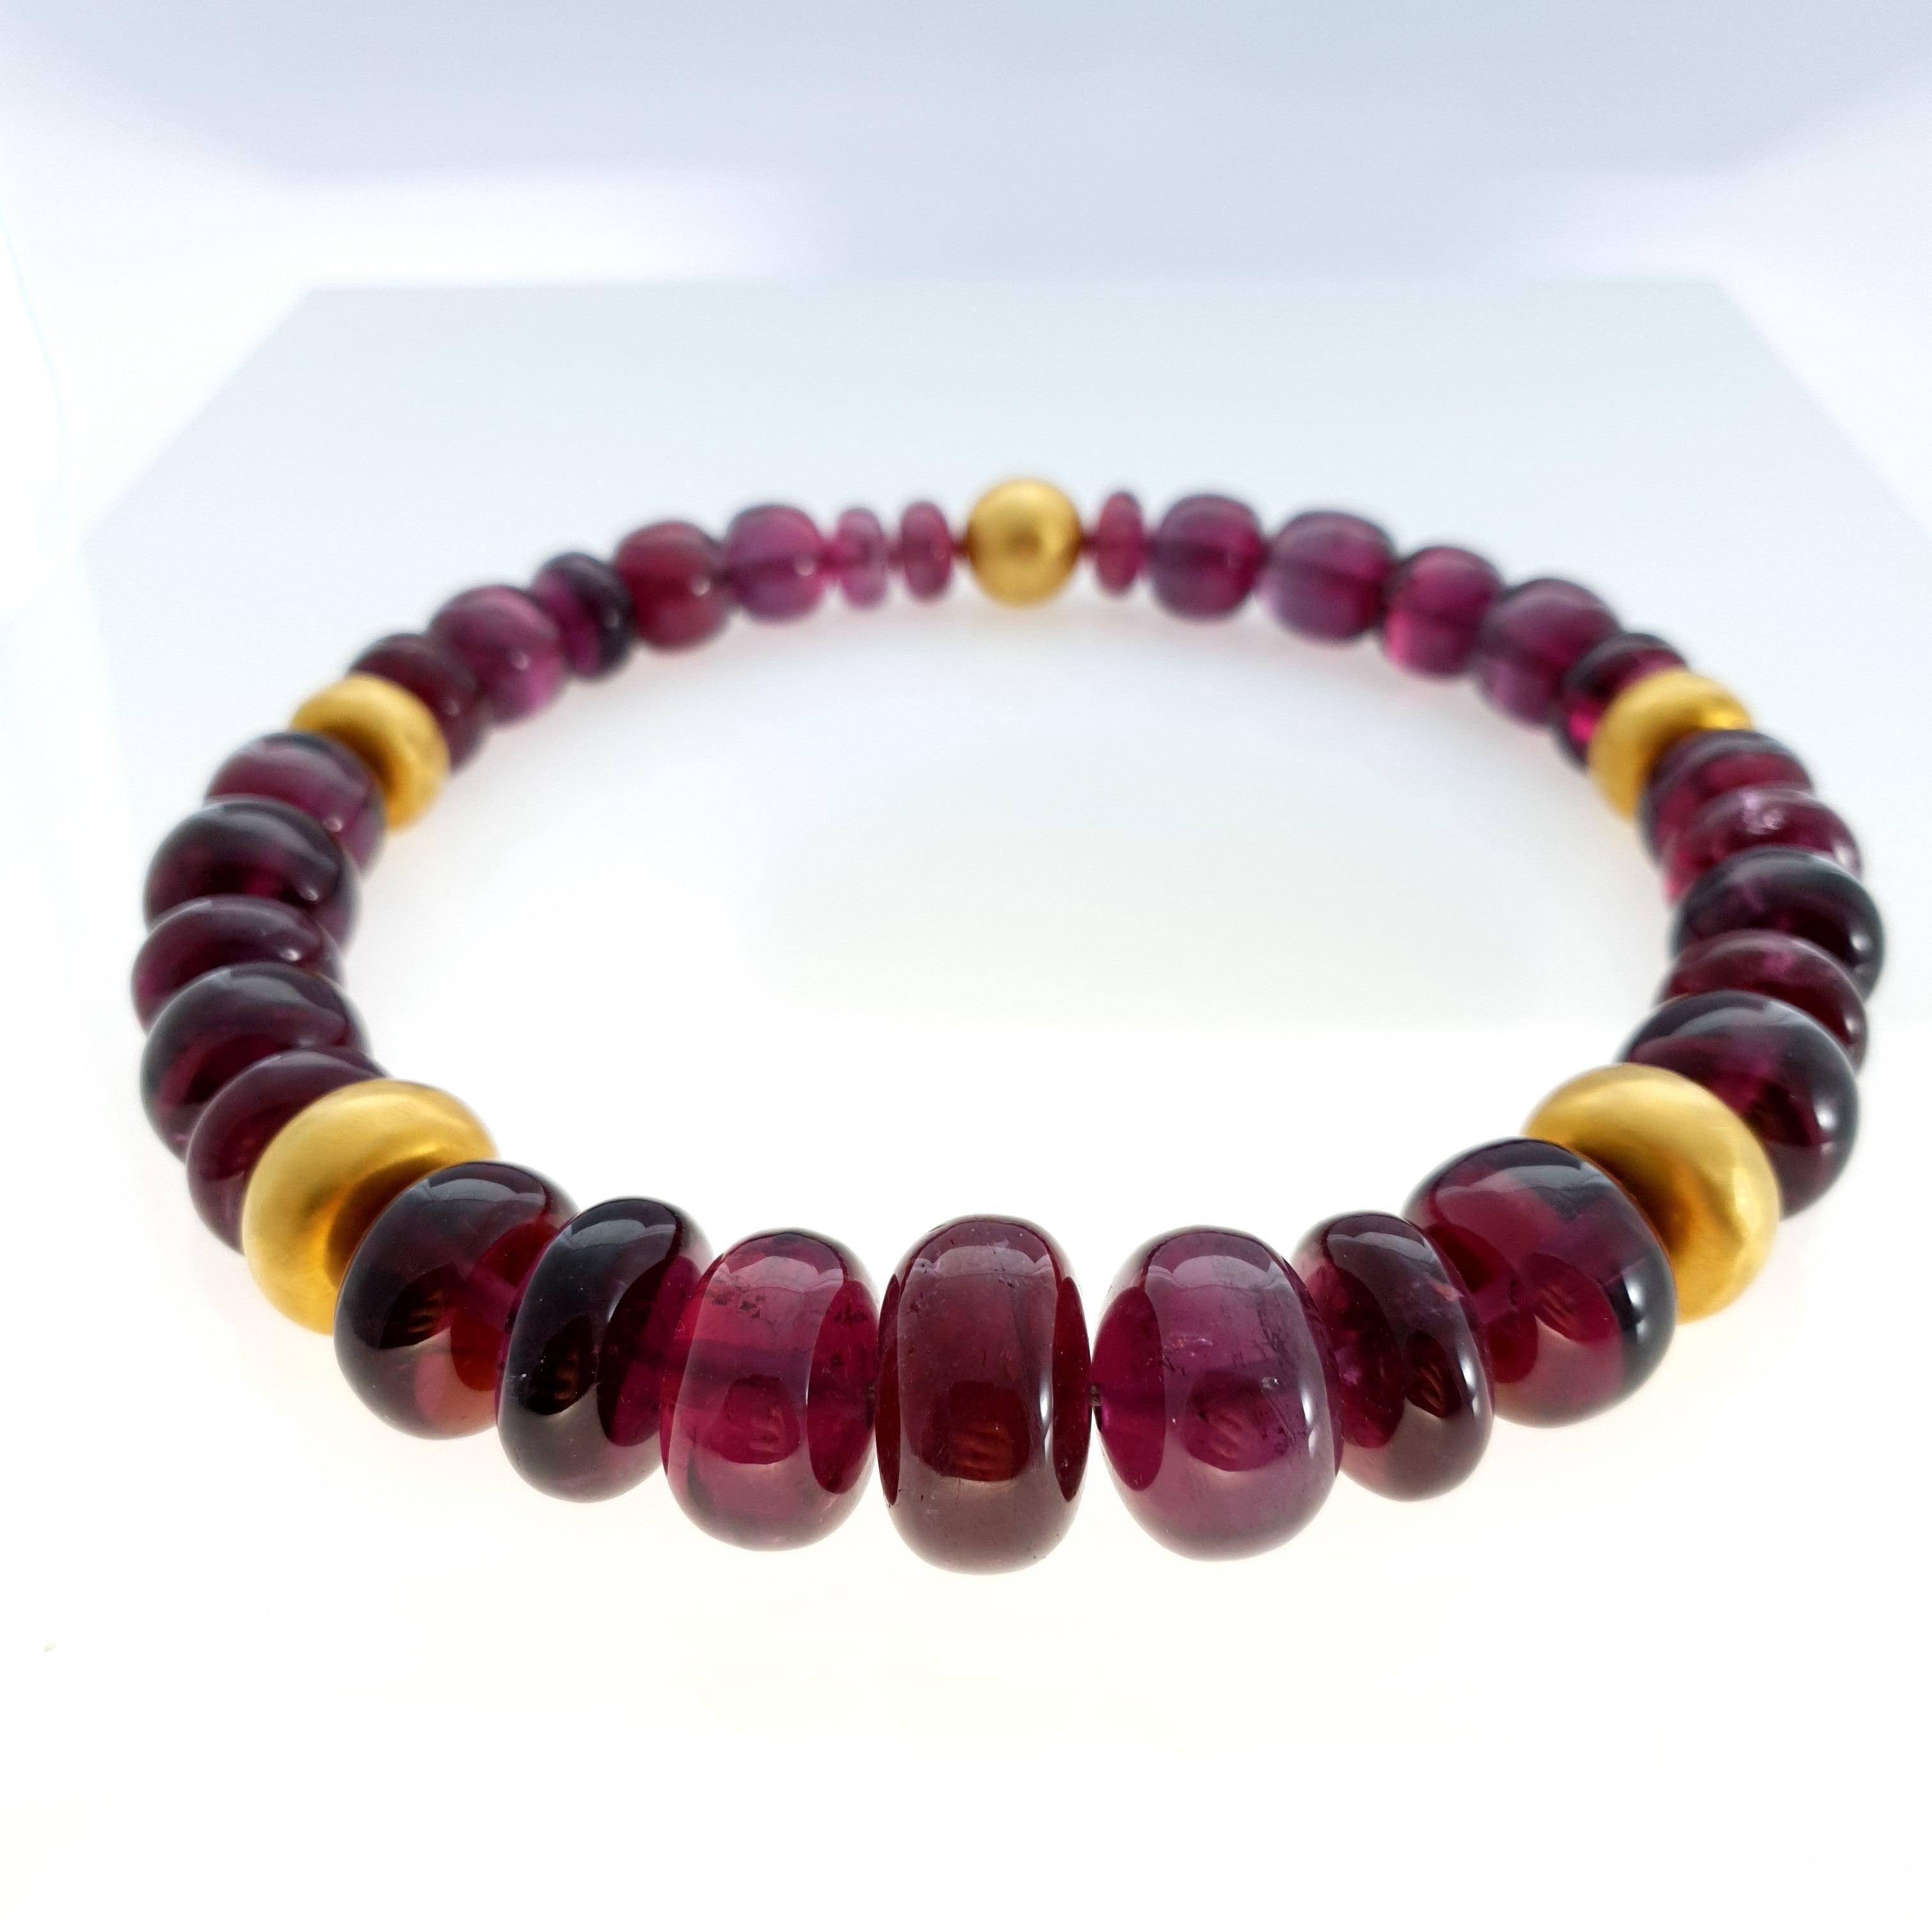 MASTERPIECE
This Big Natural Purple Rubelite Tourmaline Rondel Beaded Necklace with 18 Carat Yellow Gold matt is totally handmade. Cutting as well as goldwork are made in German quality. The screw clasp is easy to handle and very secure.
Outstanding